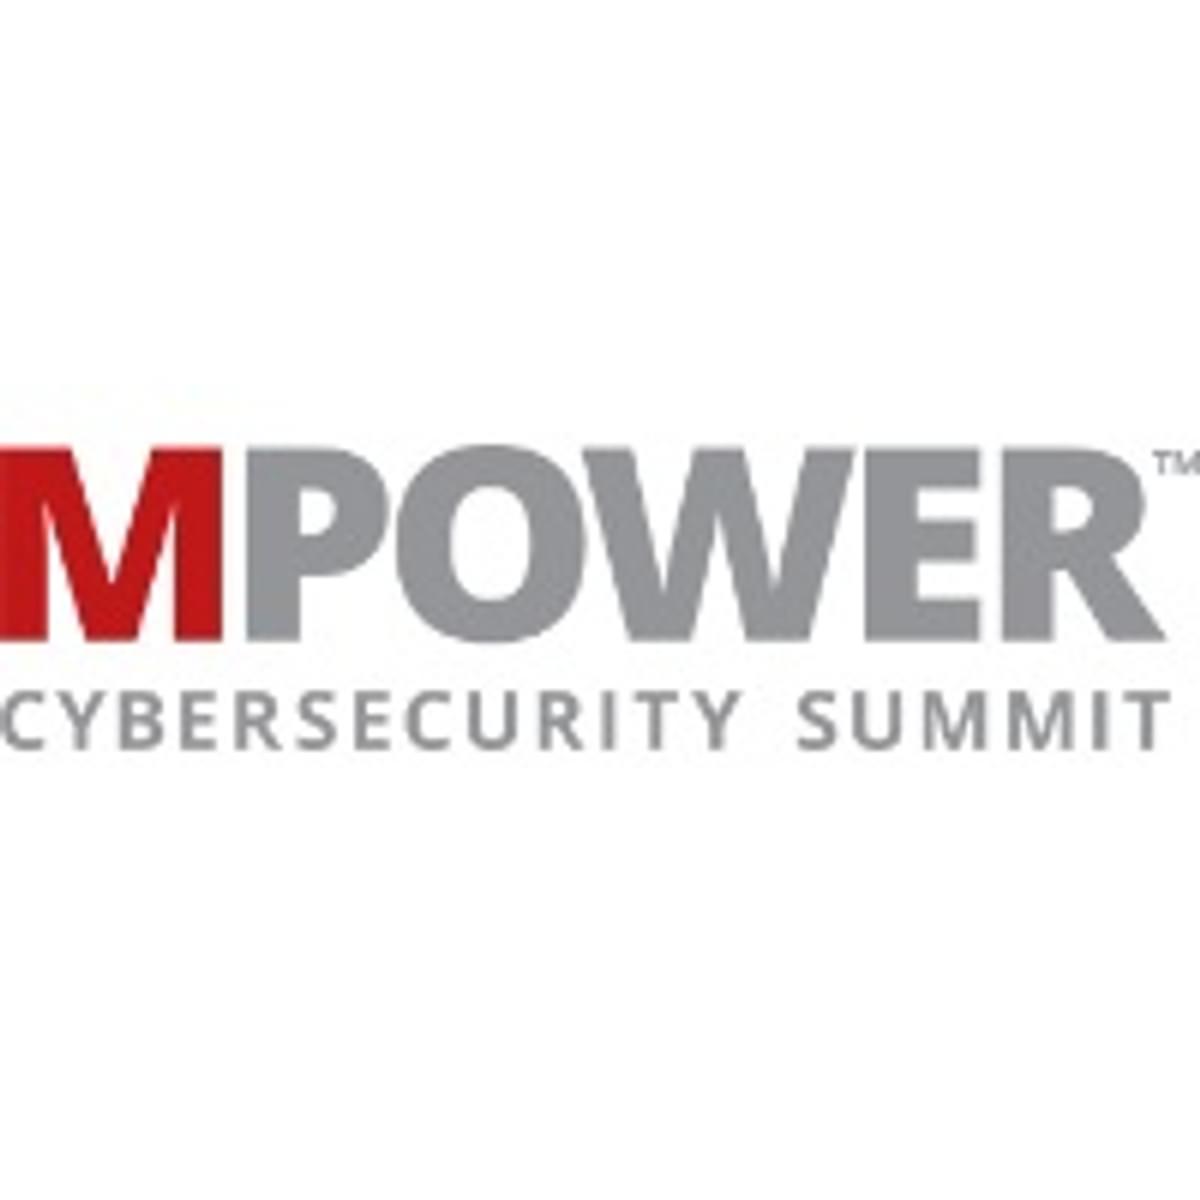 McAfee MPOWER Cybersecurity Summit image